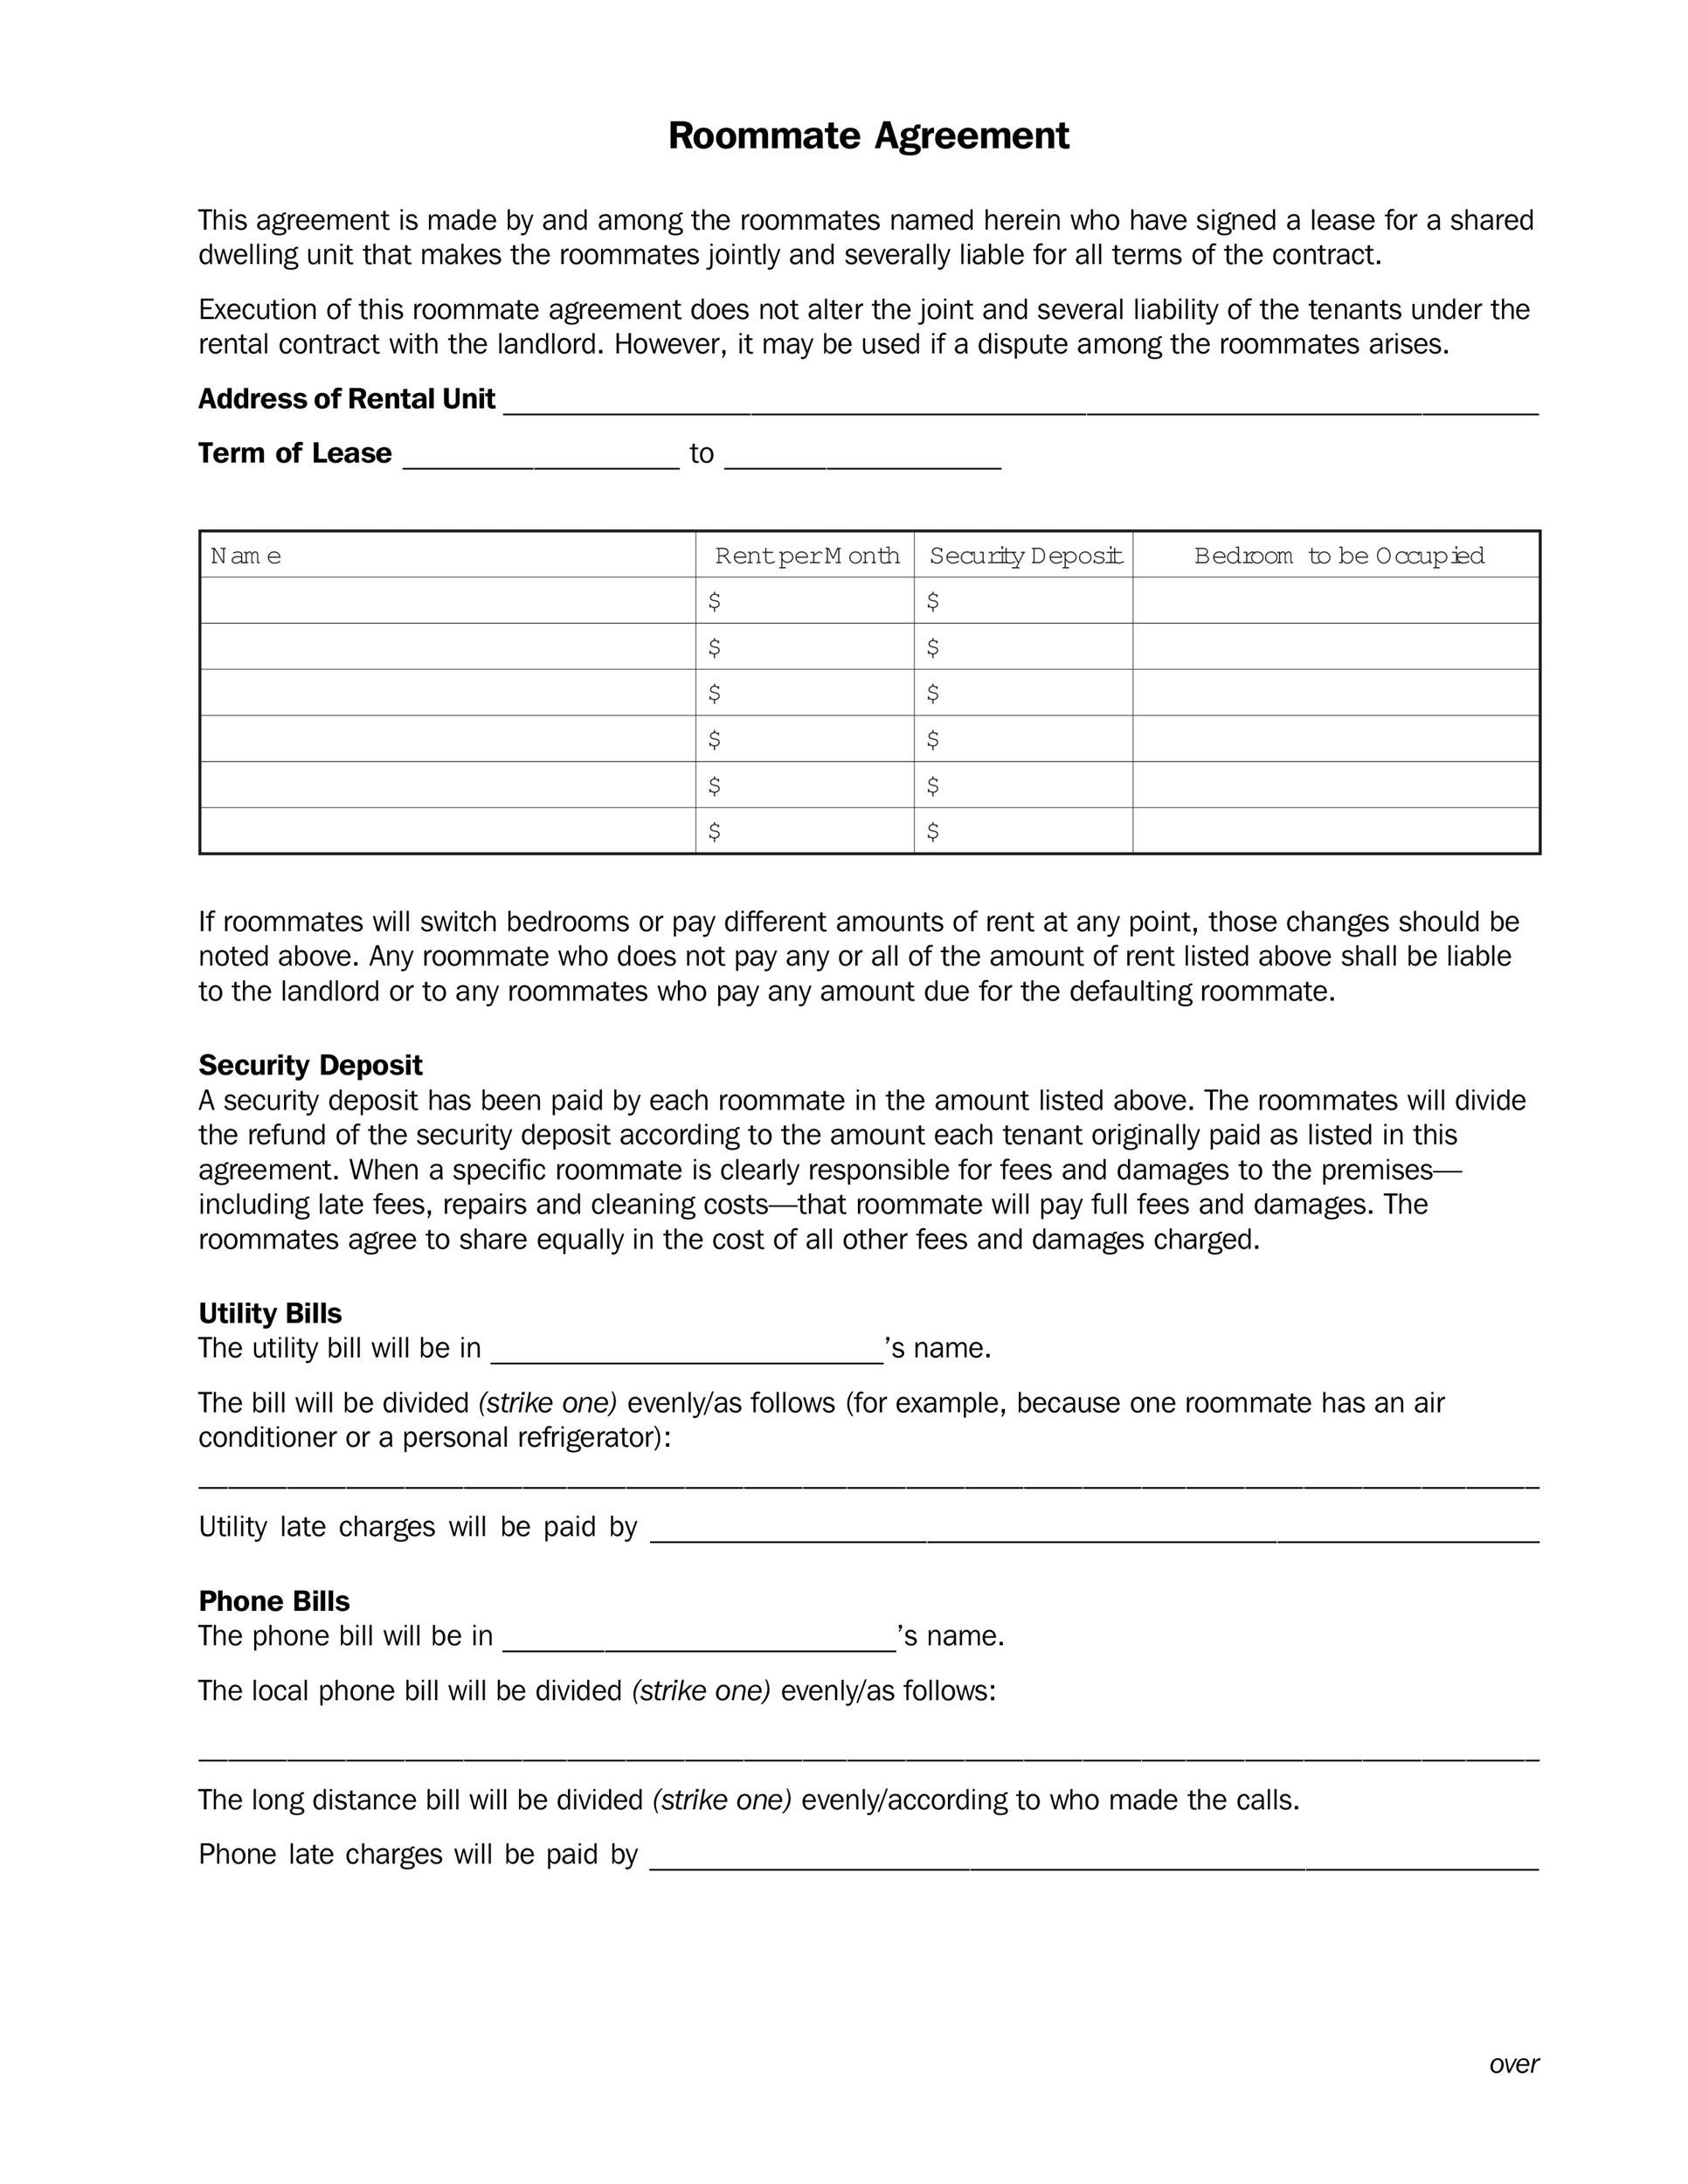 40  Free Roommate Agreement Templates Forms (Word PDF)